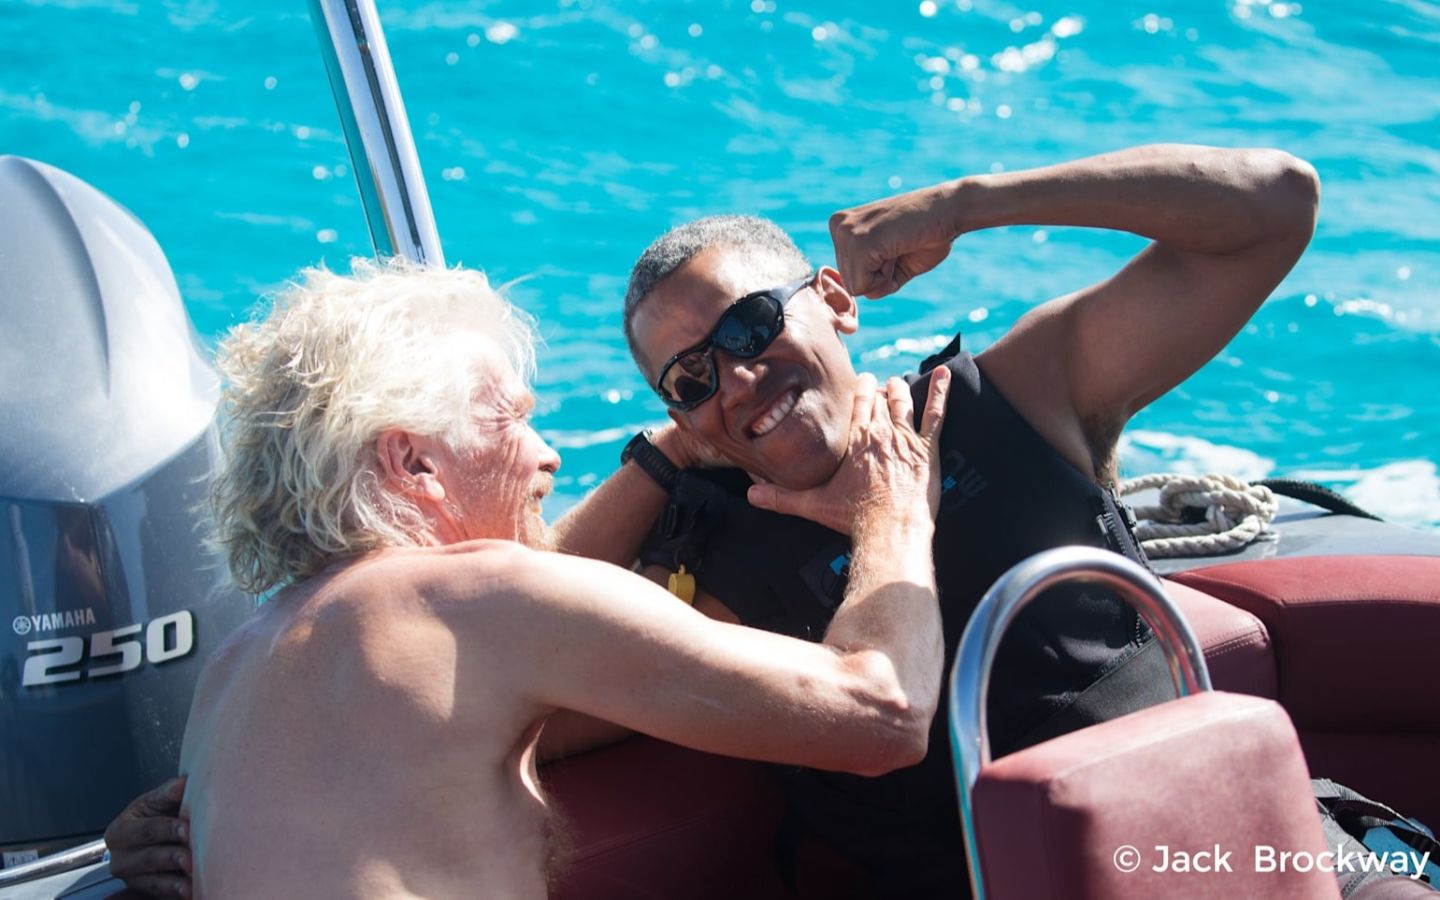 Richard Branson and Barack Obama on a boat, smiling and joking